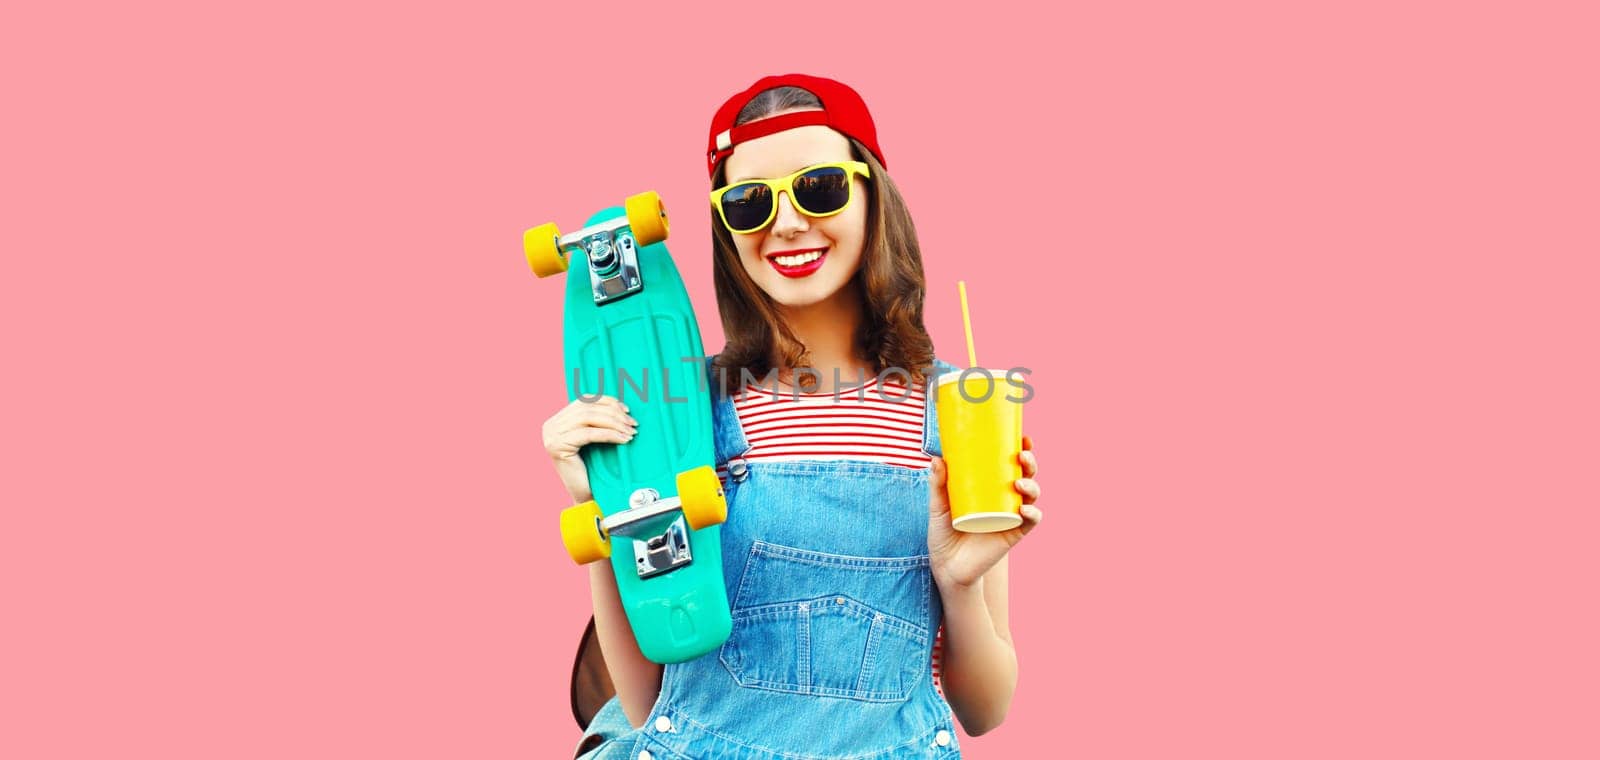 Portrait of happy smiling young woman with skateboard and cup of juice on pink background by Rohappy